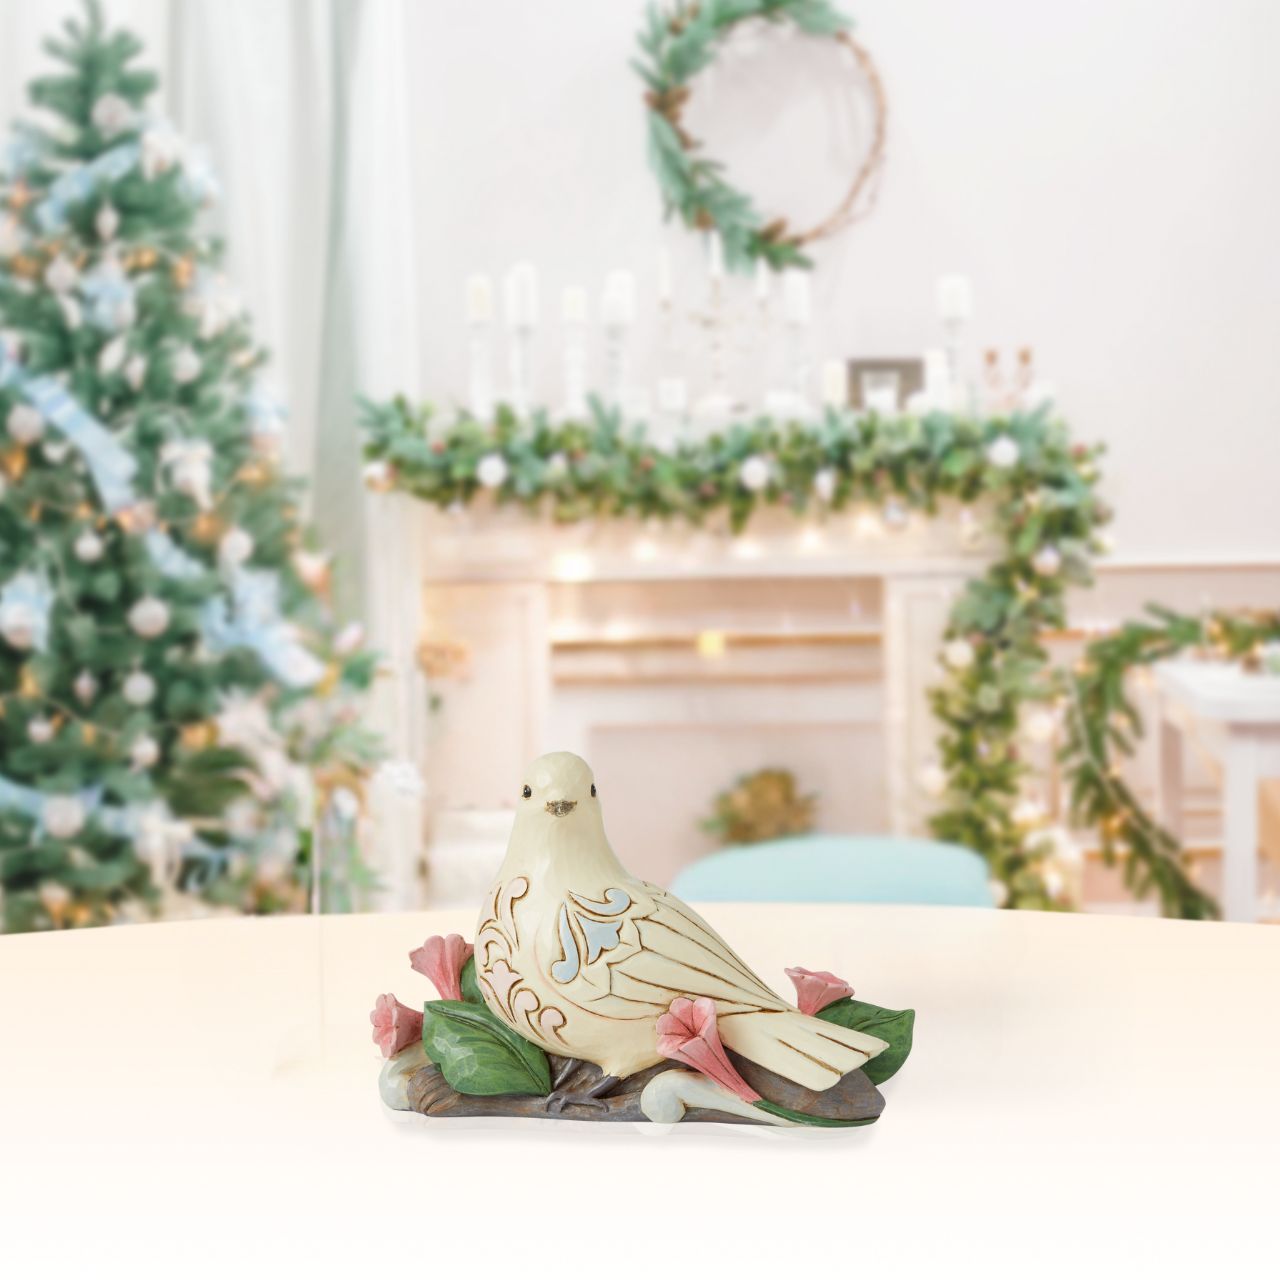 Jim Shore White Dove Figurine  "Peaceful Messenger" Birds are always a delight to watch. With alluring plumage and peaceful posture, they're often thought of as good omens and symbols of freedom.